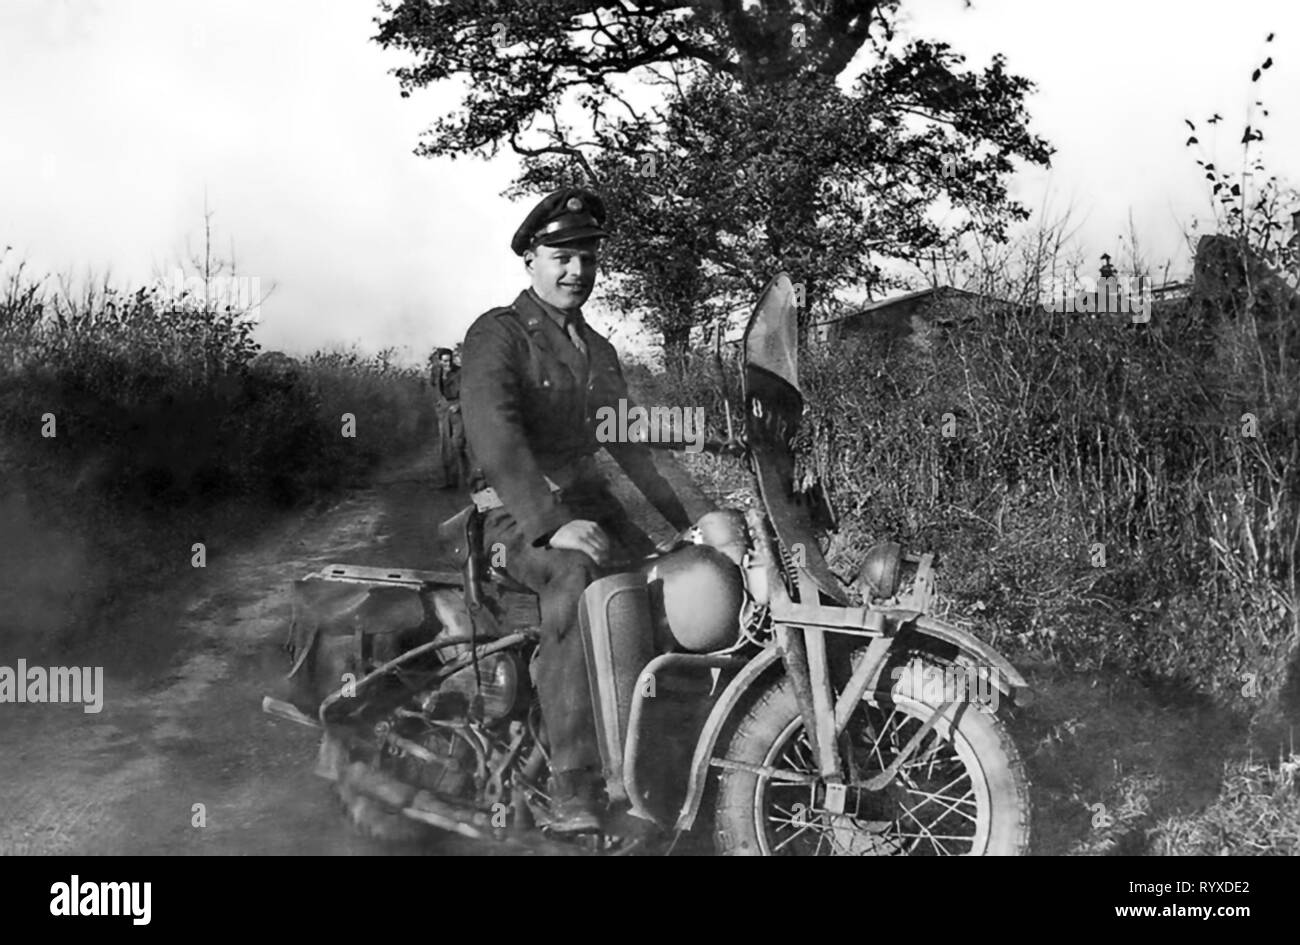 Personal photographs and memorabilia of fighting Americans during the Second World War. Military Police on motorcycles. Stock Photo